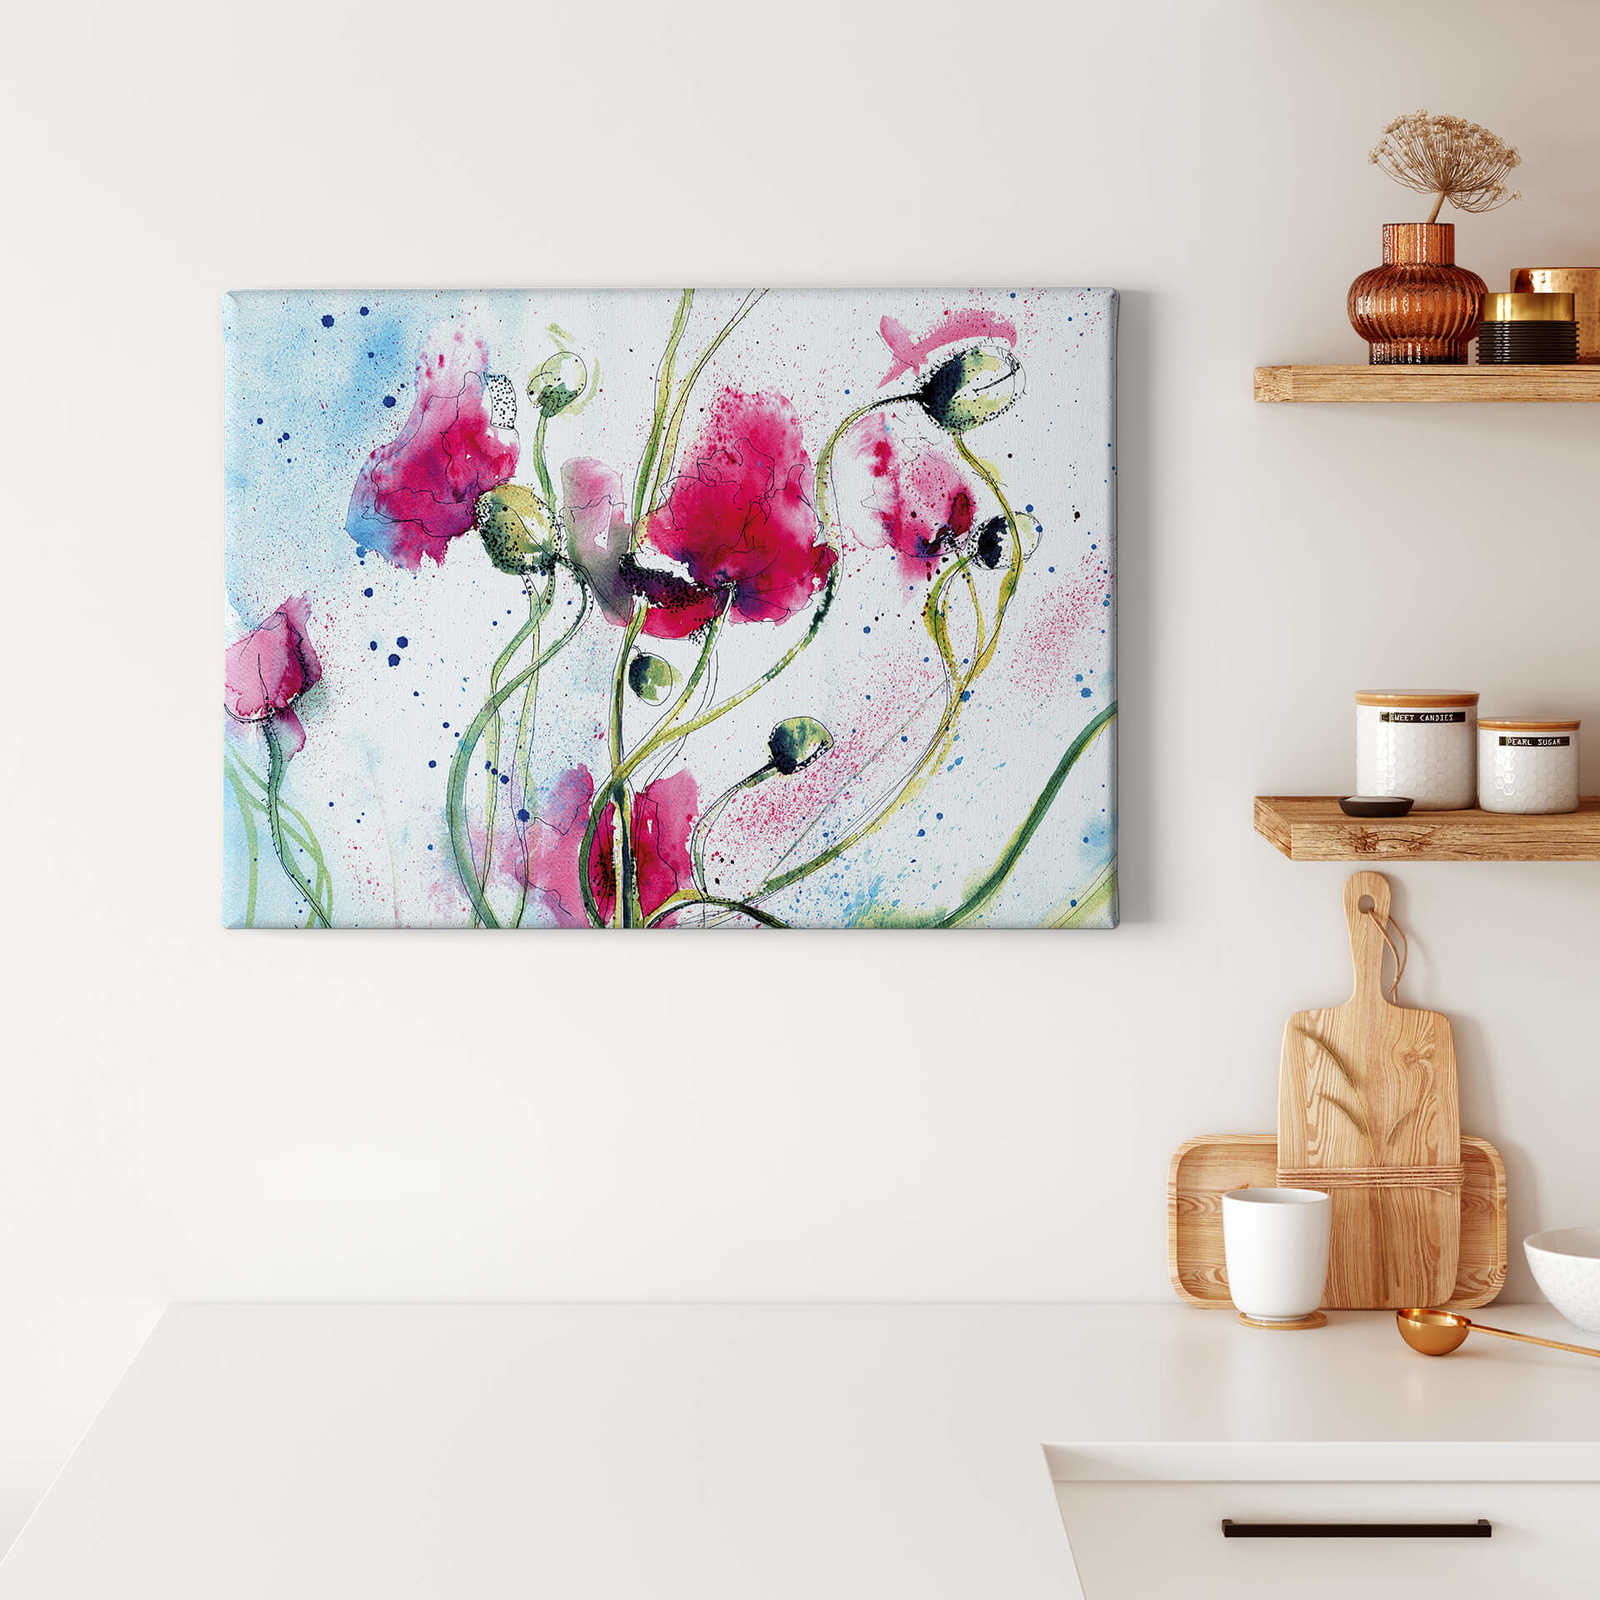             Canvas print poppies, bright watercolour painting
        